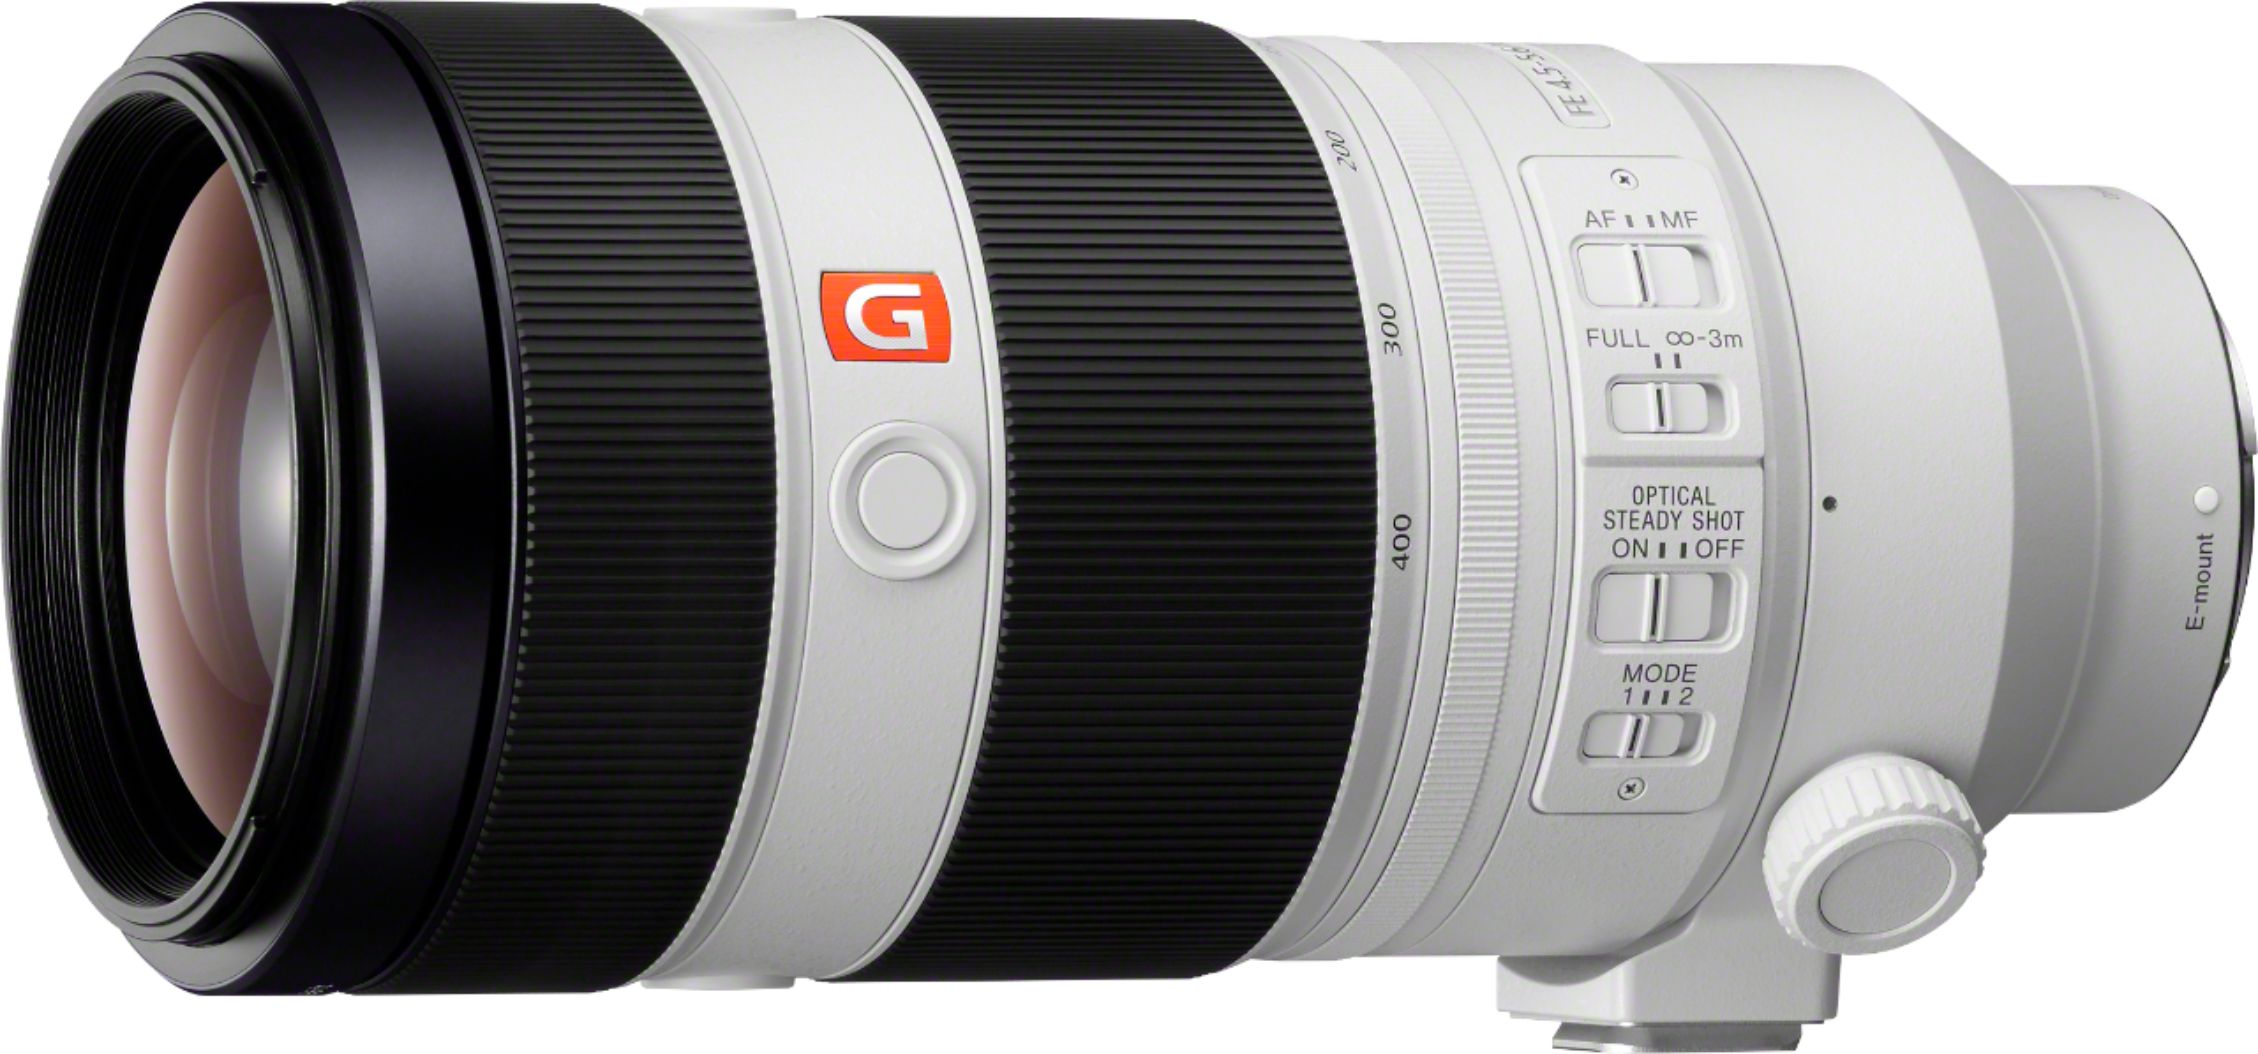 Angle View: Sony - E 18-135mm f/3.5-5.6 OSS All-in-One Zoom Lens for E-Mount Cameras - Black